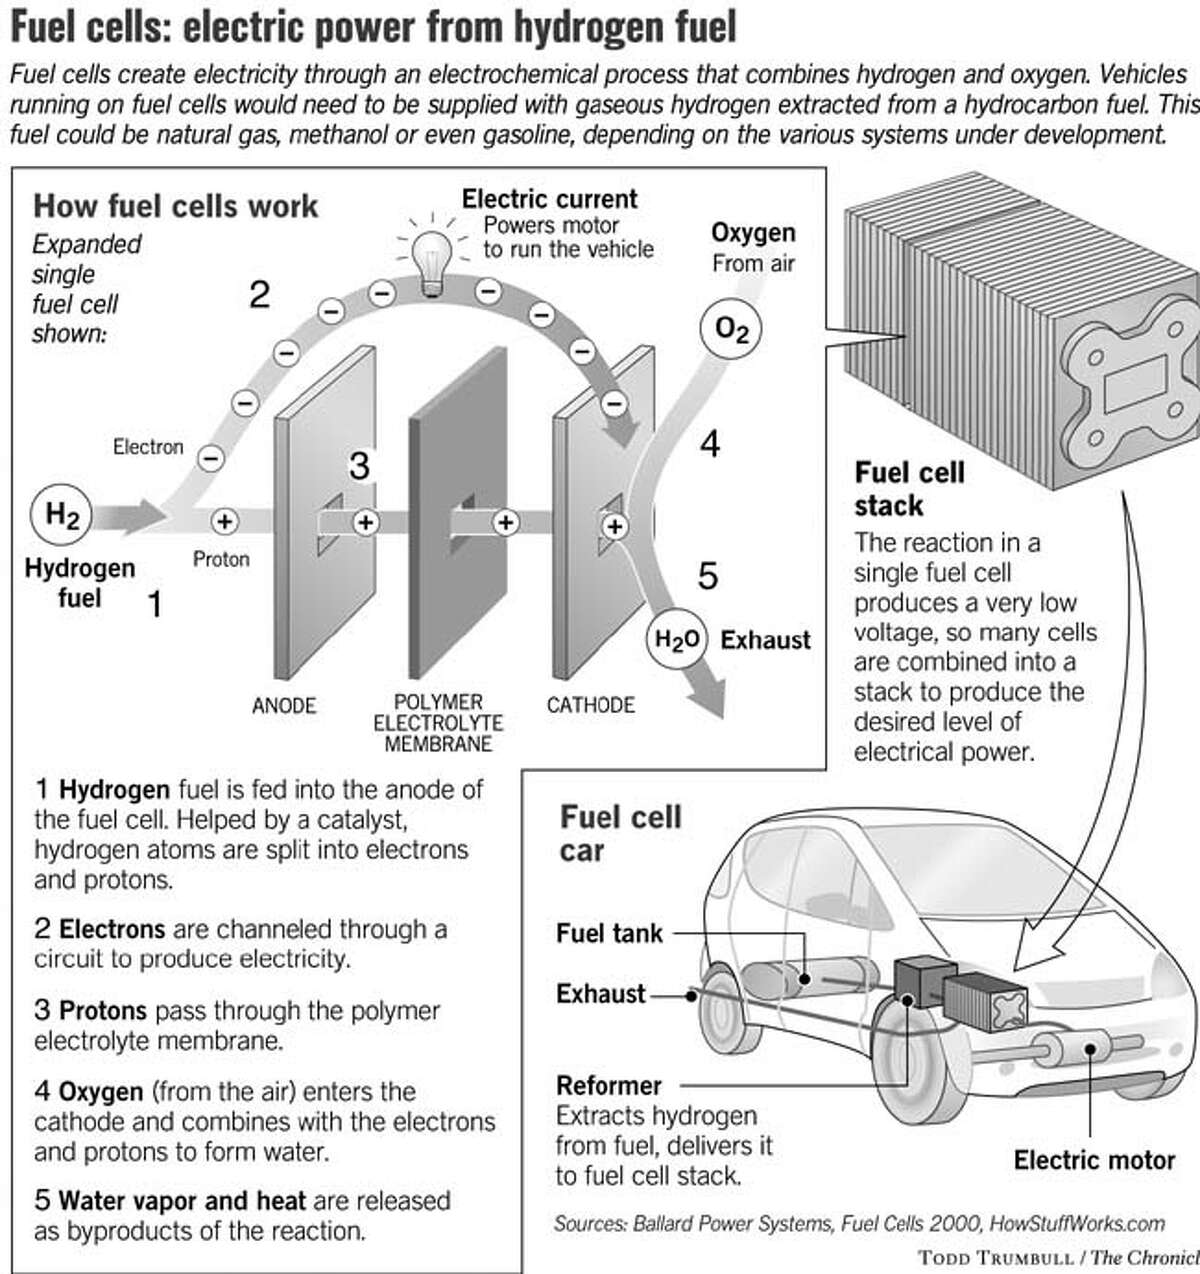 Fuel Cells: Electric Power From Hydrogen Fuel. Chronicle graphic by Todd Trumbull